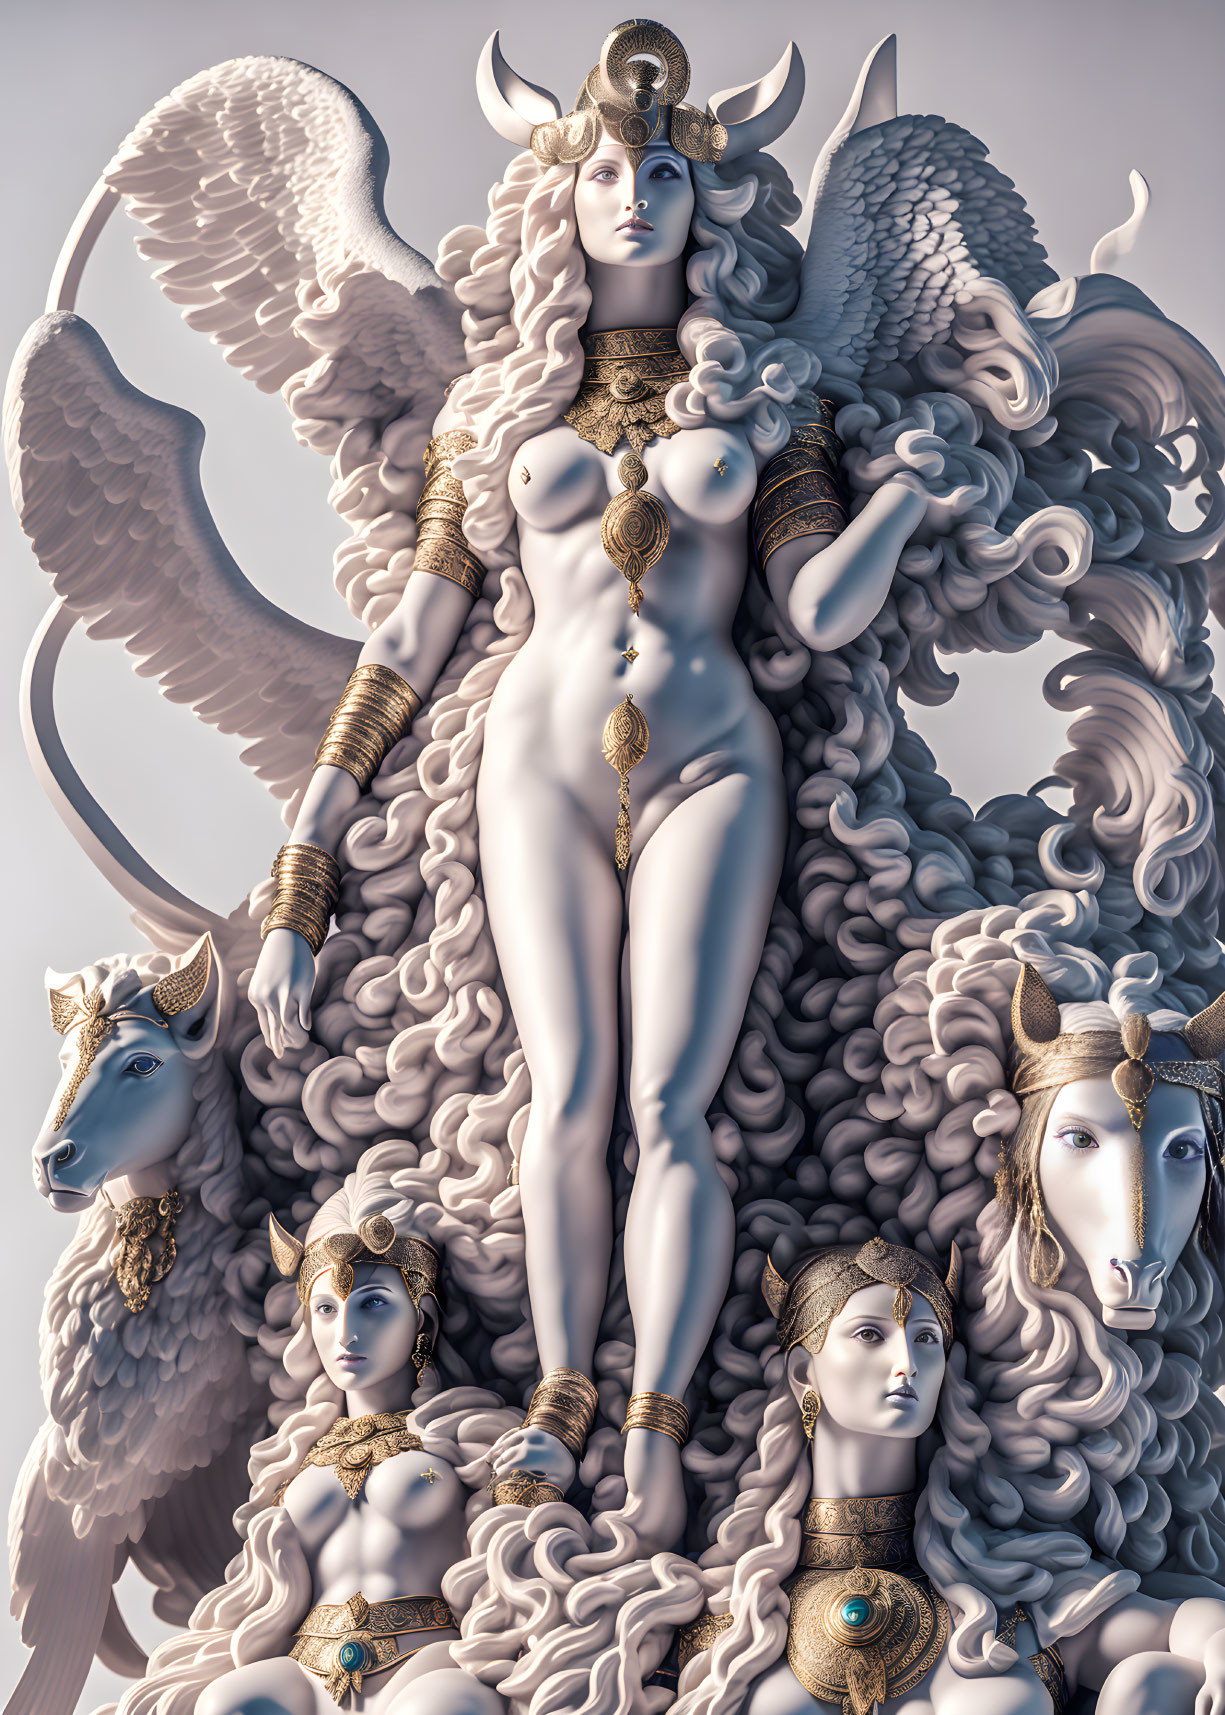 Monochromatic digital artwork of mythical figure with wings and horns surrounded by sculpted ram heads